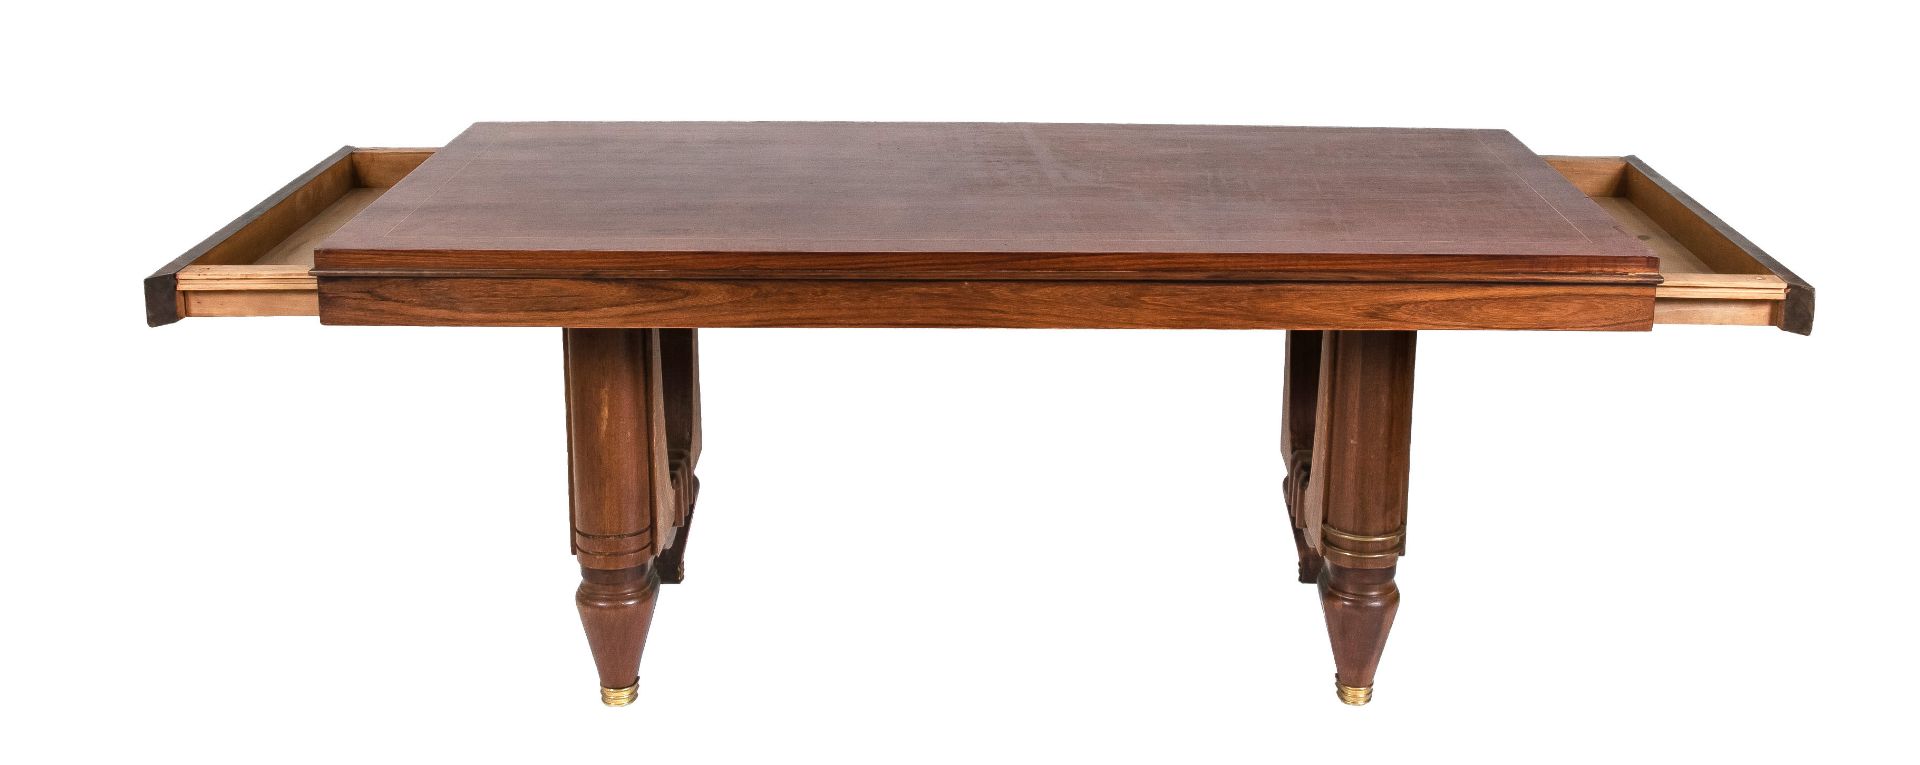 Table around 1900, rosewood with brass inlay, feet with brass, side pull-out drawers, 75 x 176 x - Image 2 of 2